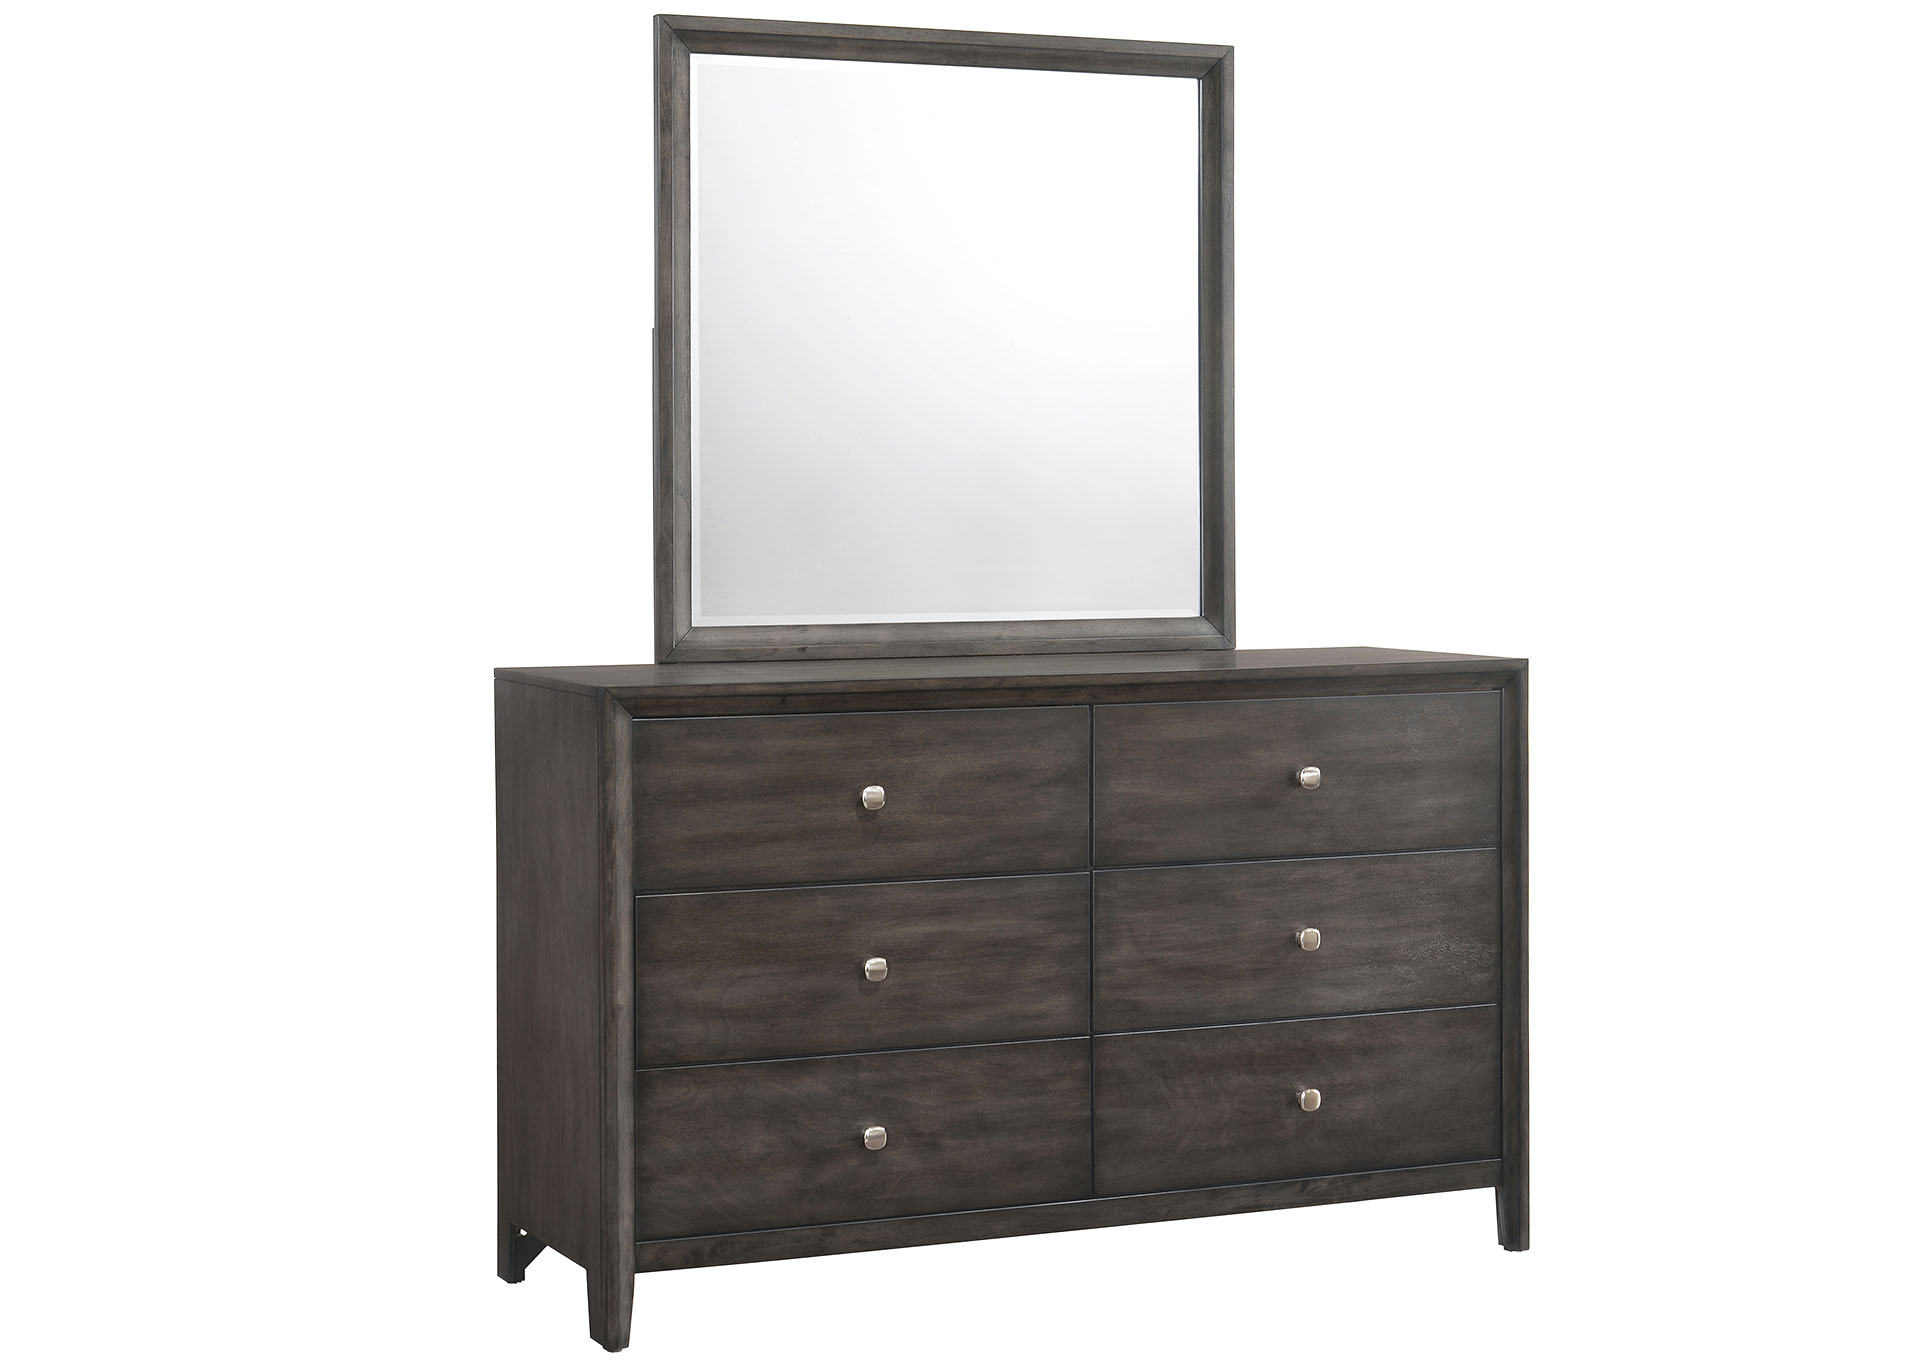 K R Furniture 1060 Grant Full Bed With Dresser And Mirror